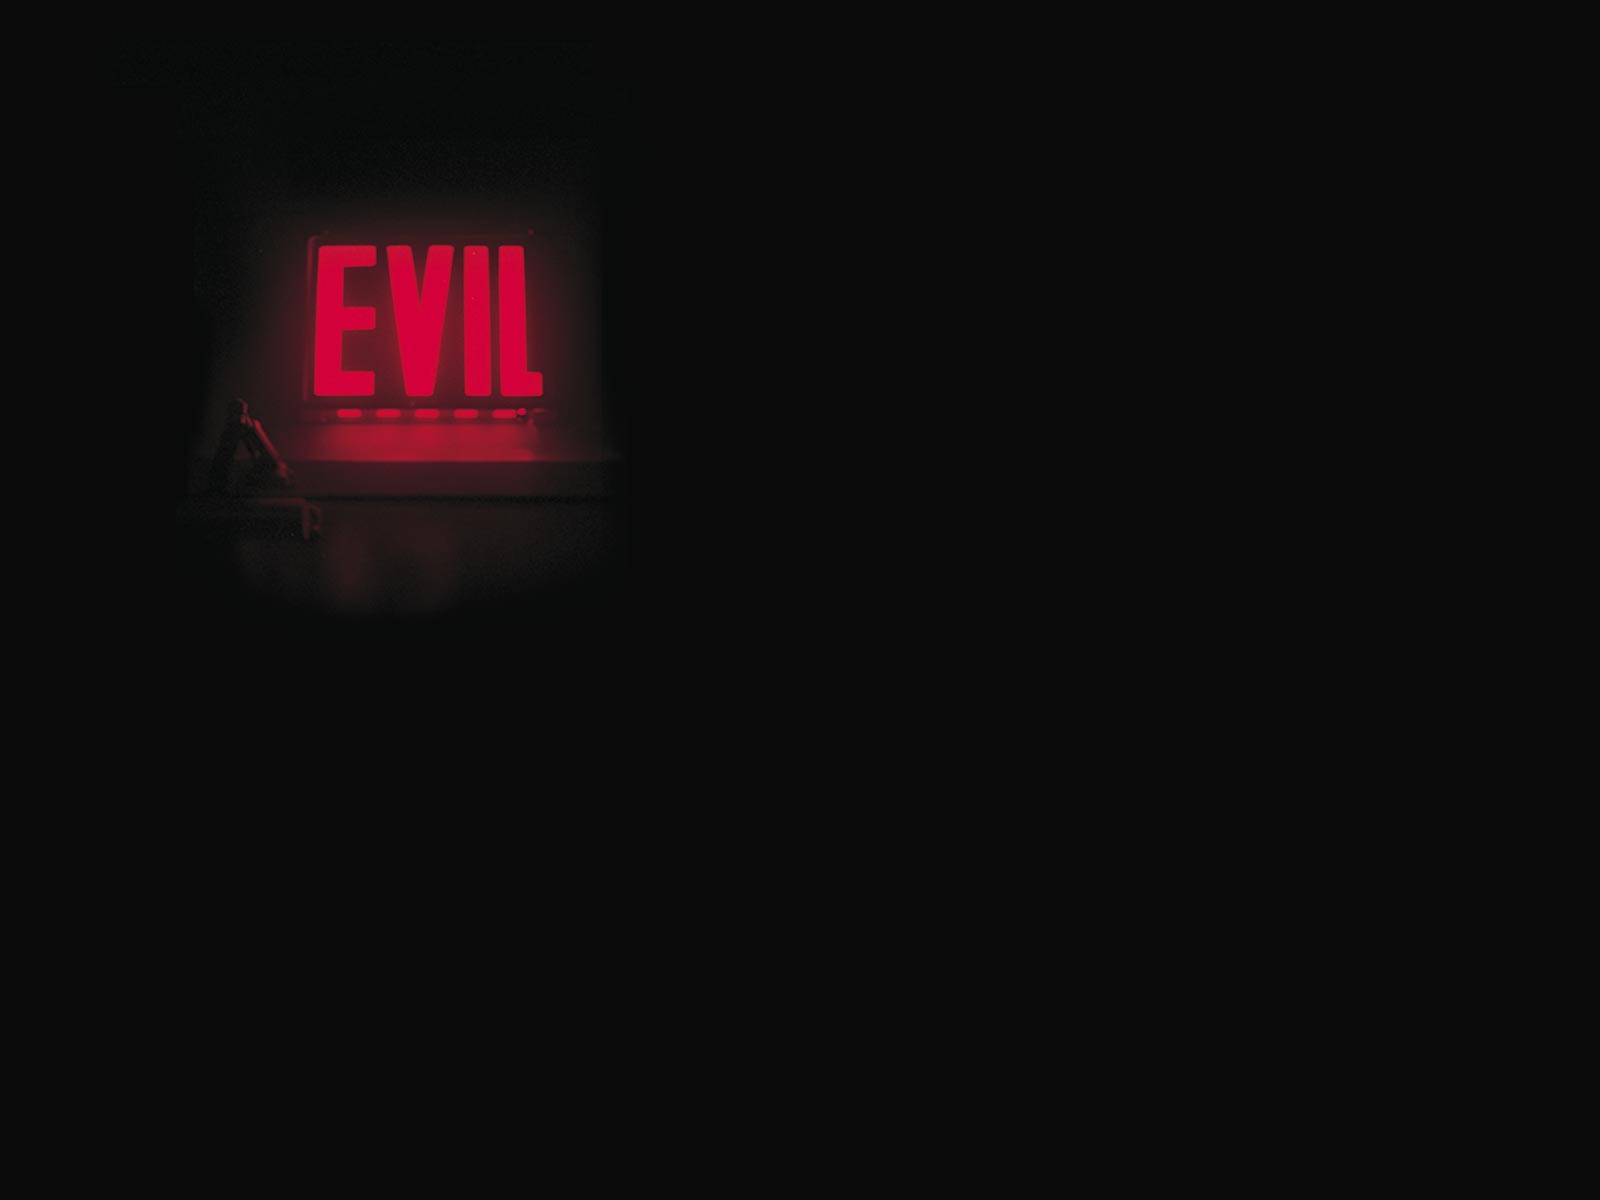 A photograph of artist Vincent Mazeau's Evil/Exit sign lit up in red in a room with all other lights turned off.